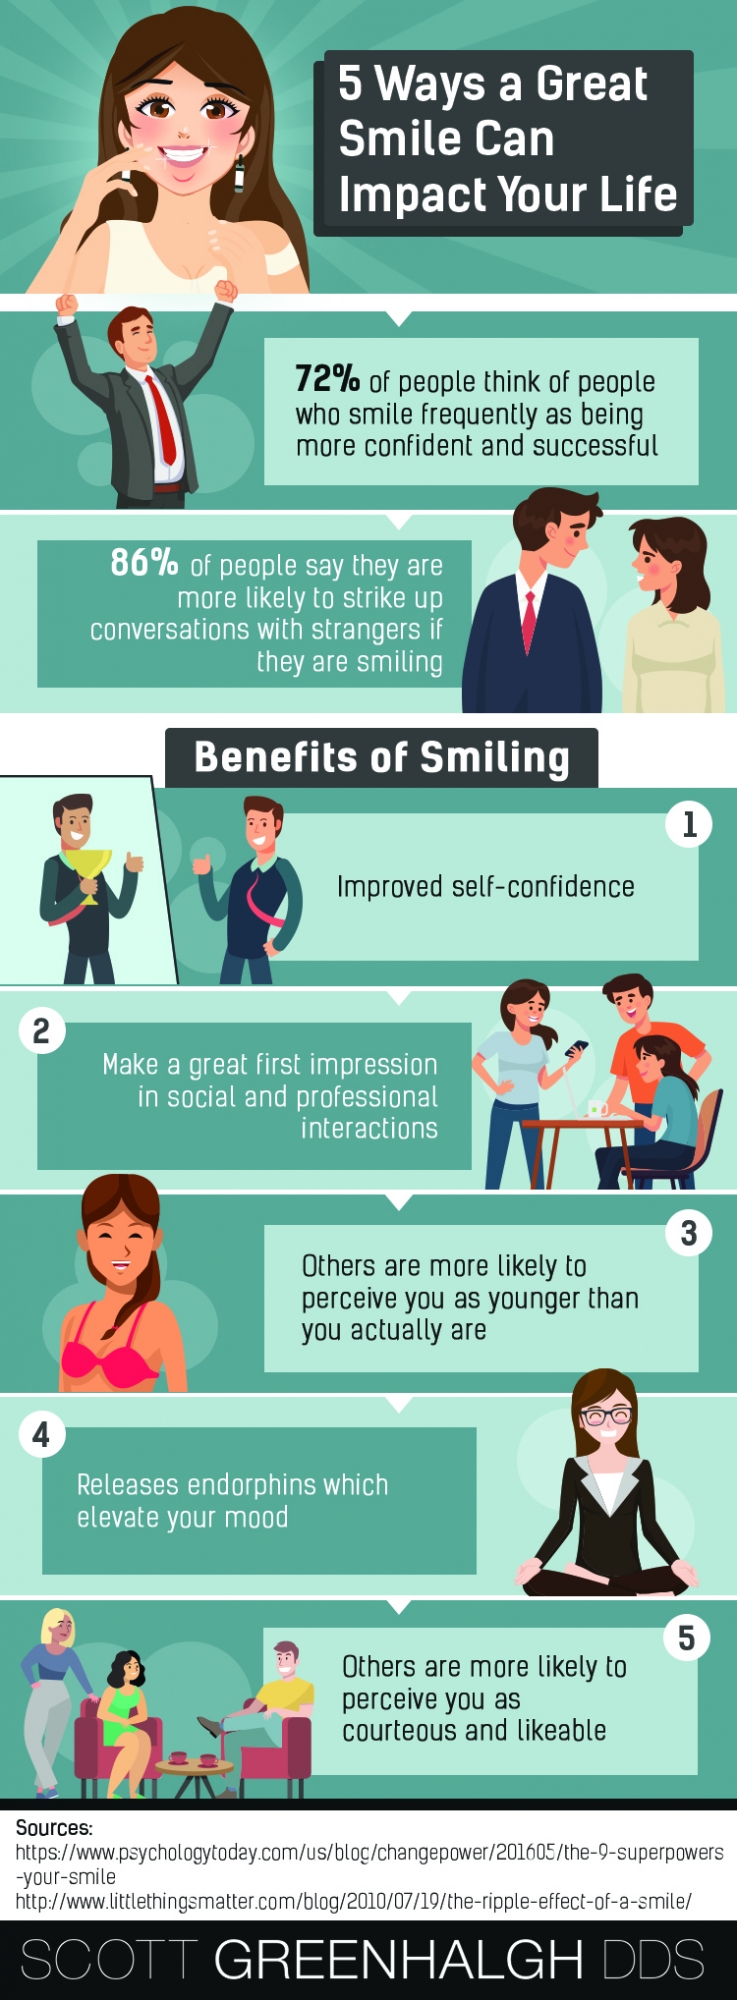 infographic discussing 5 ways a great smile can impact your life